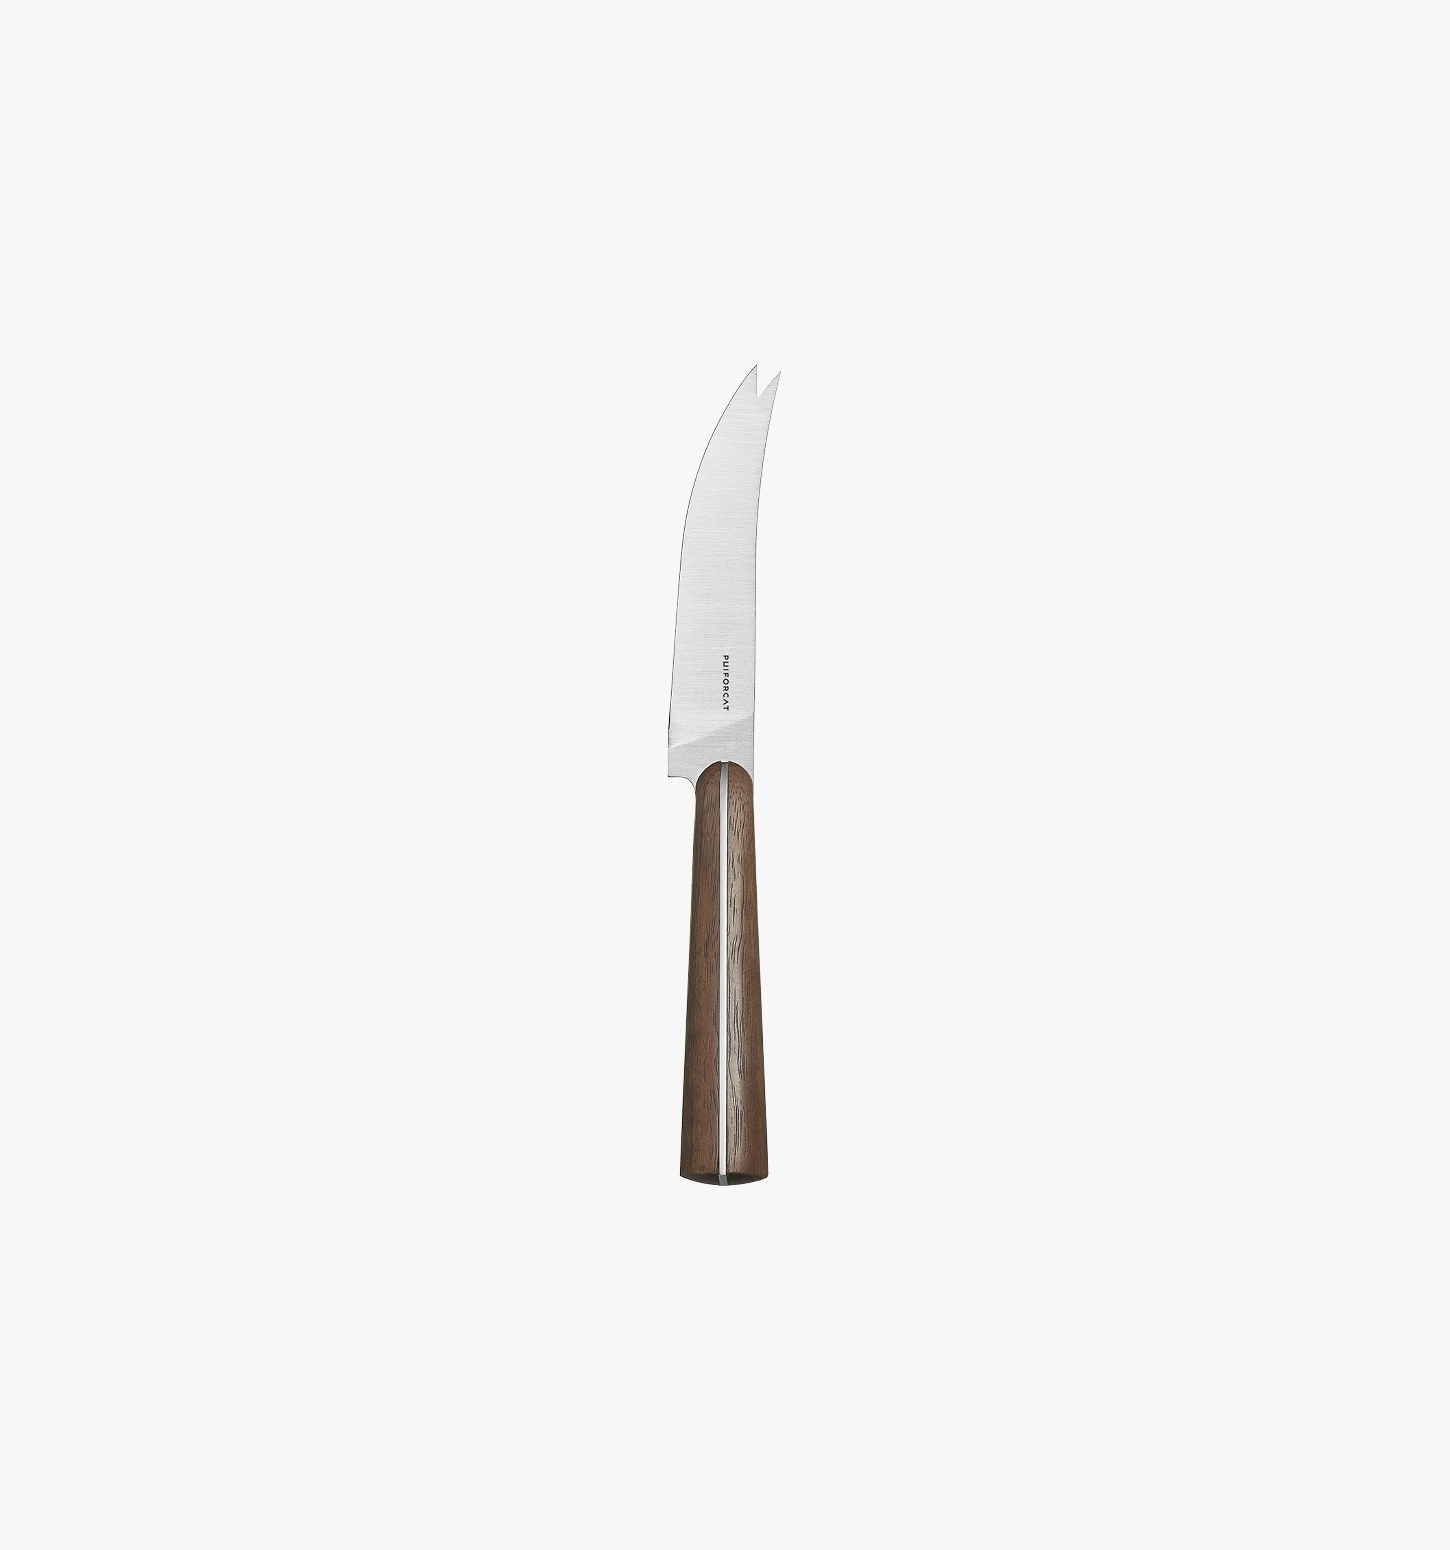 Semi firm cheese knife from Couteaux d'orfèvre collection in sterling steel and wood